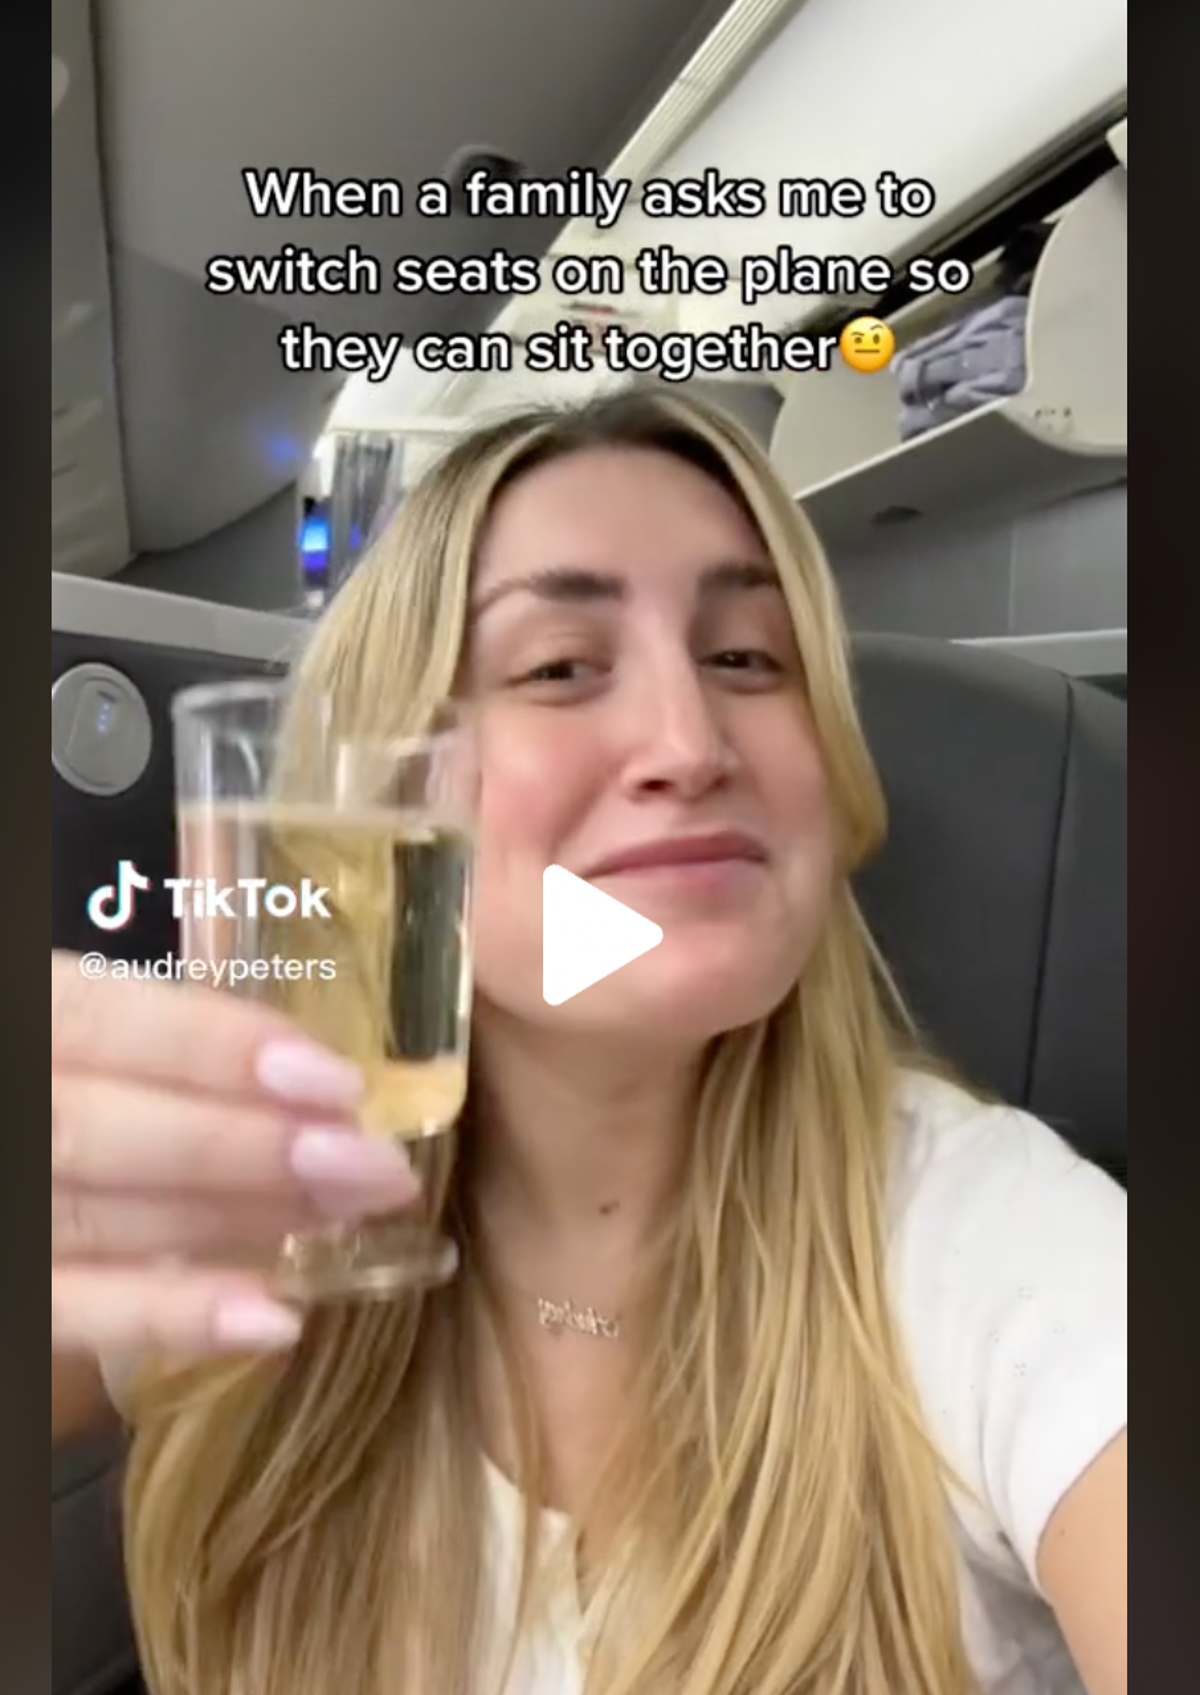 Influencer applauded for refusing to swap seats so family can sit together on flight